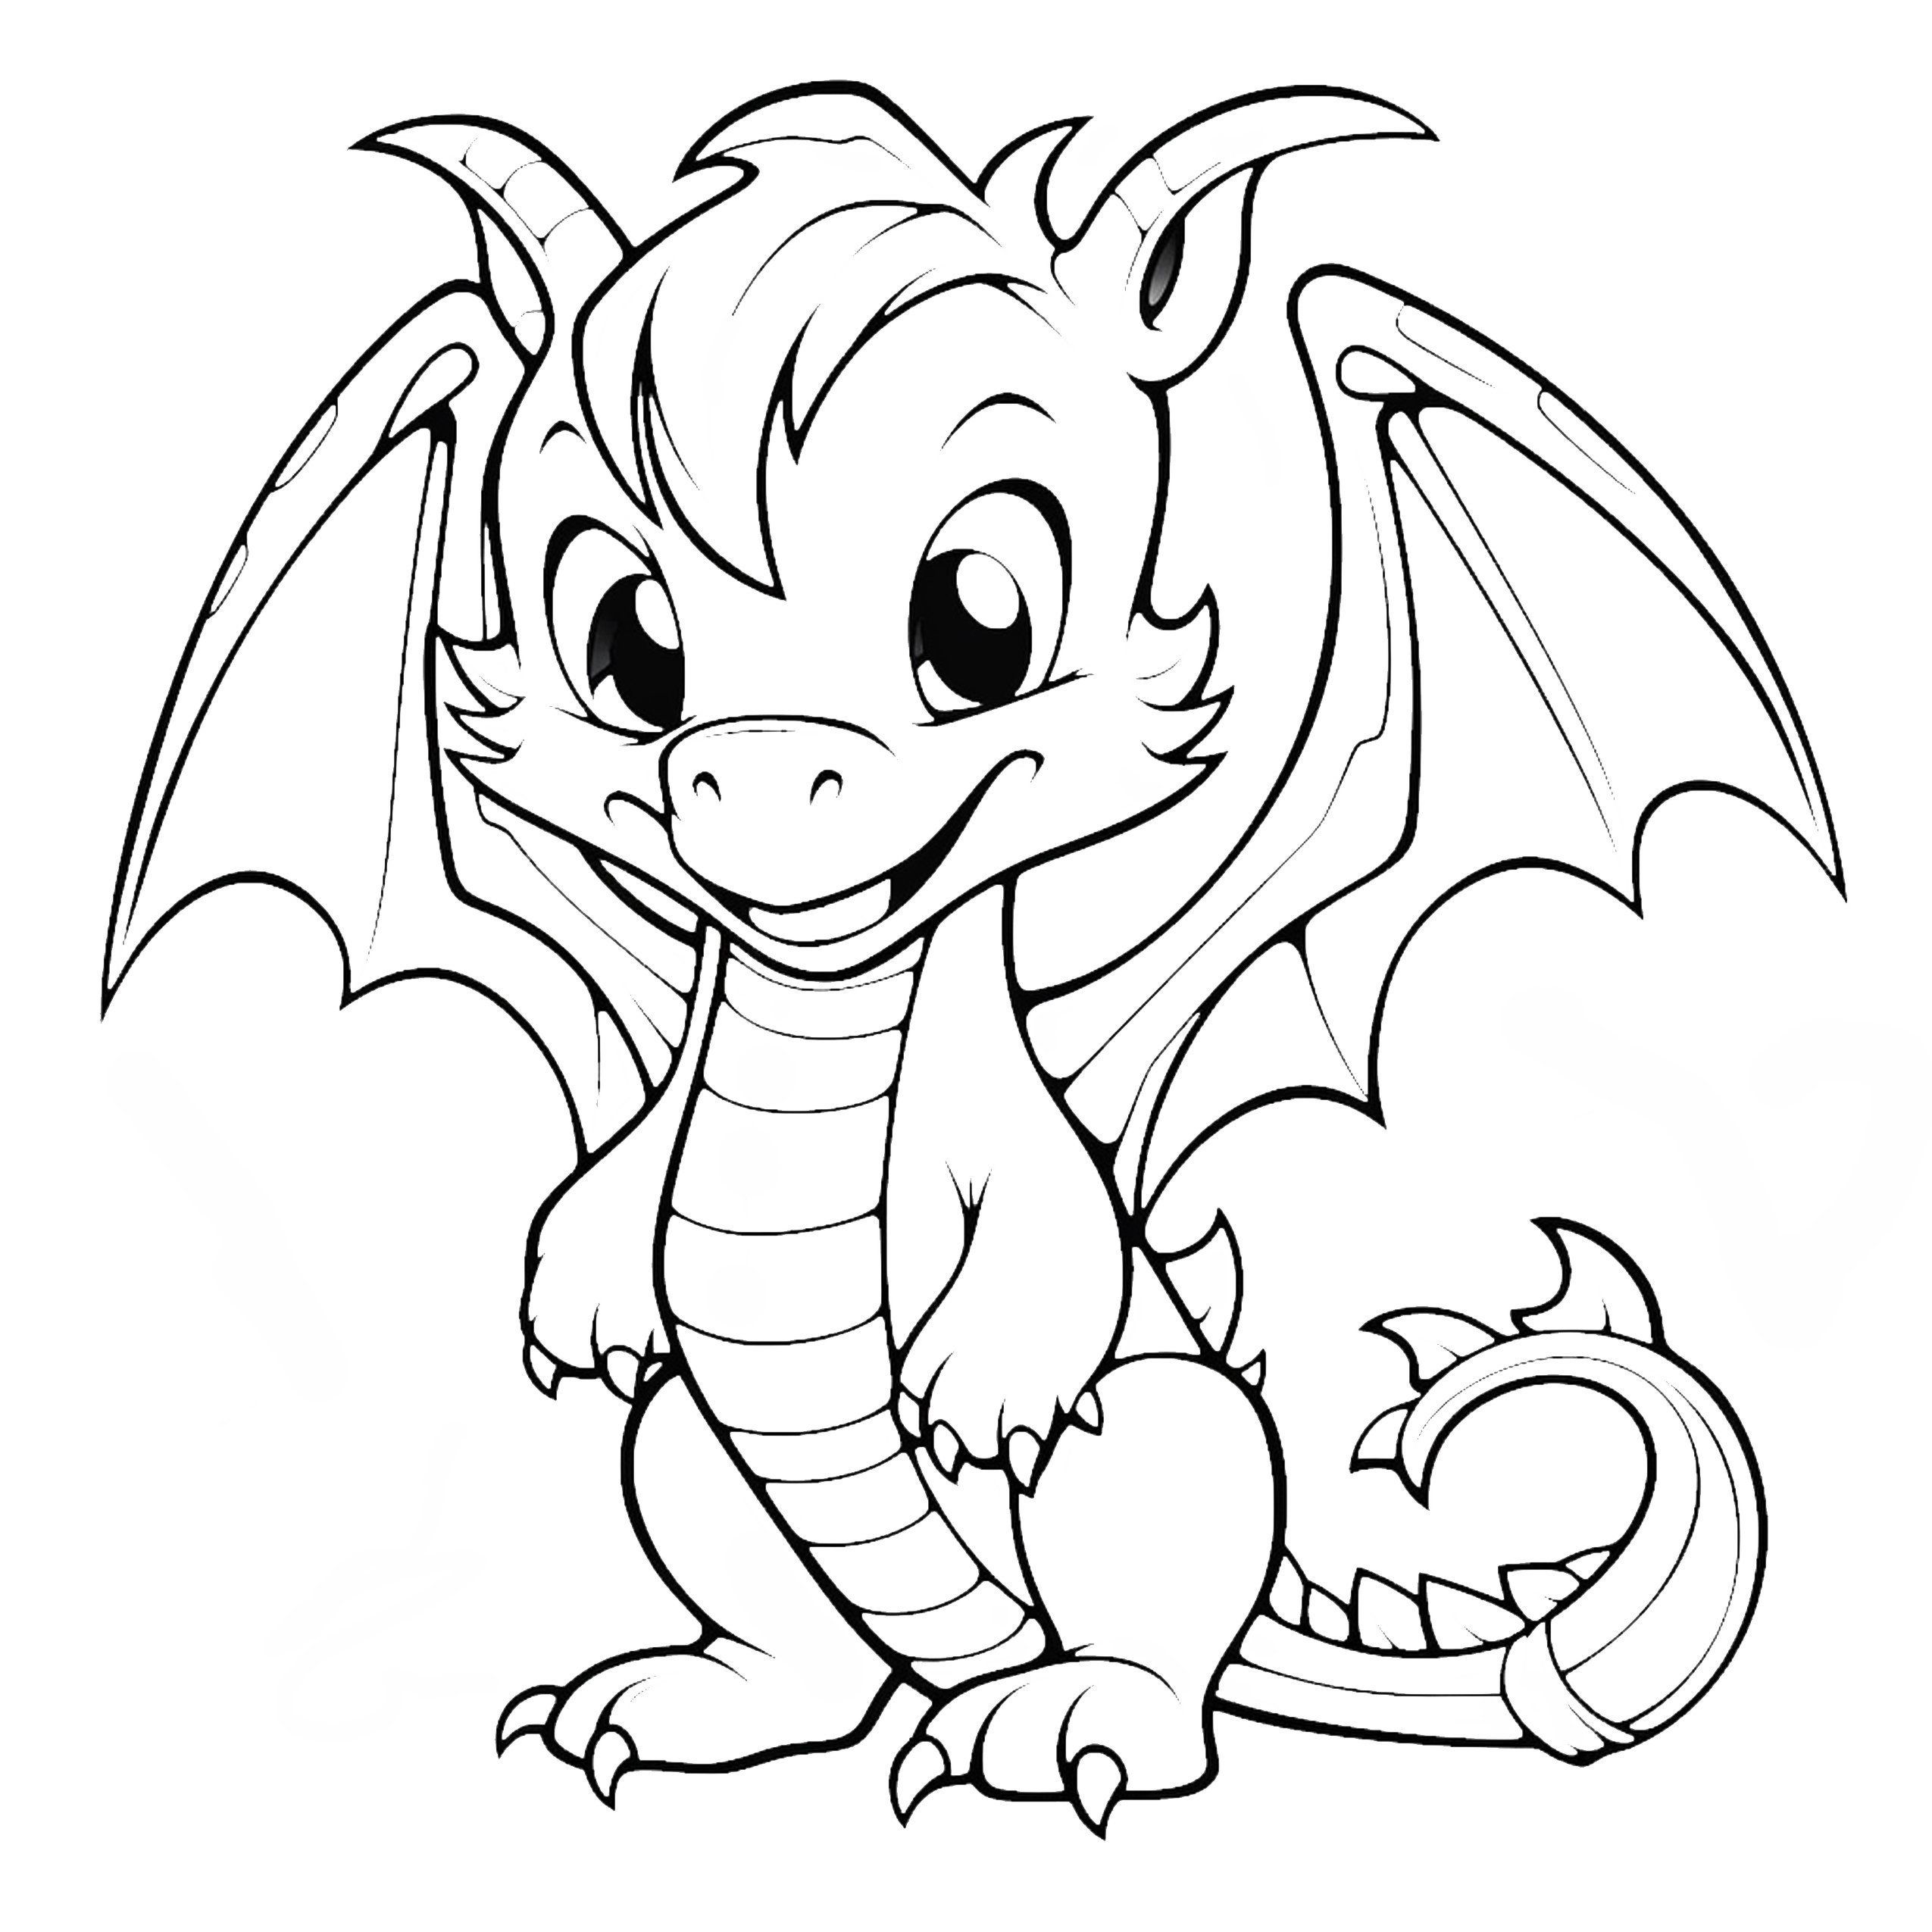 41 Cute Playful Baby Dragons Fun and Magical Coloring Book Pages for ...